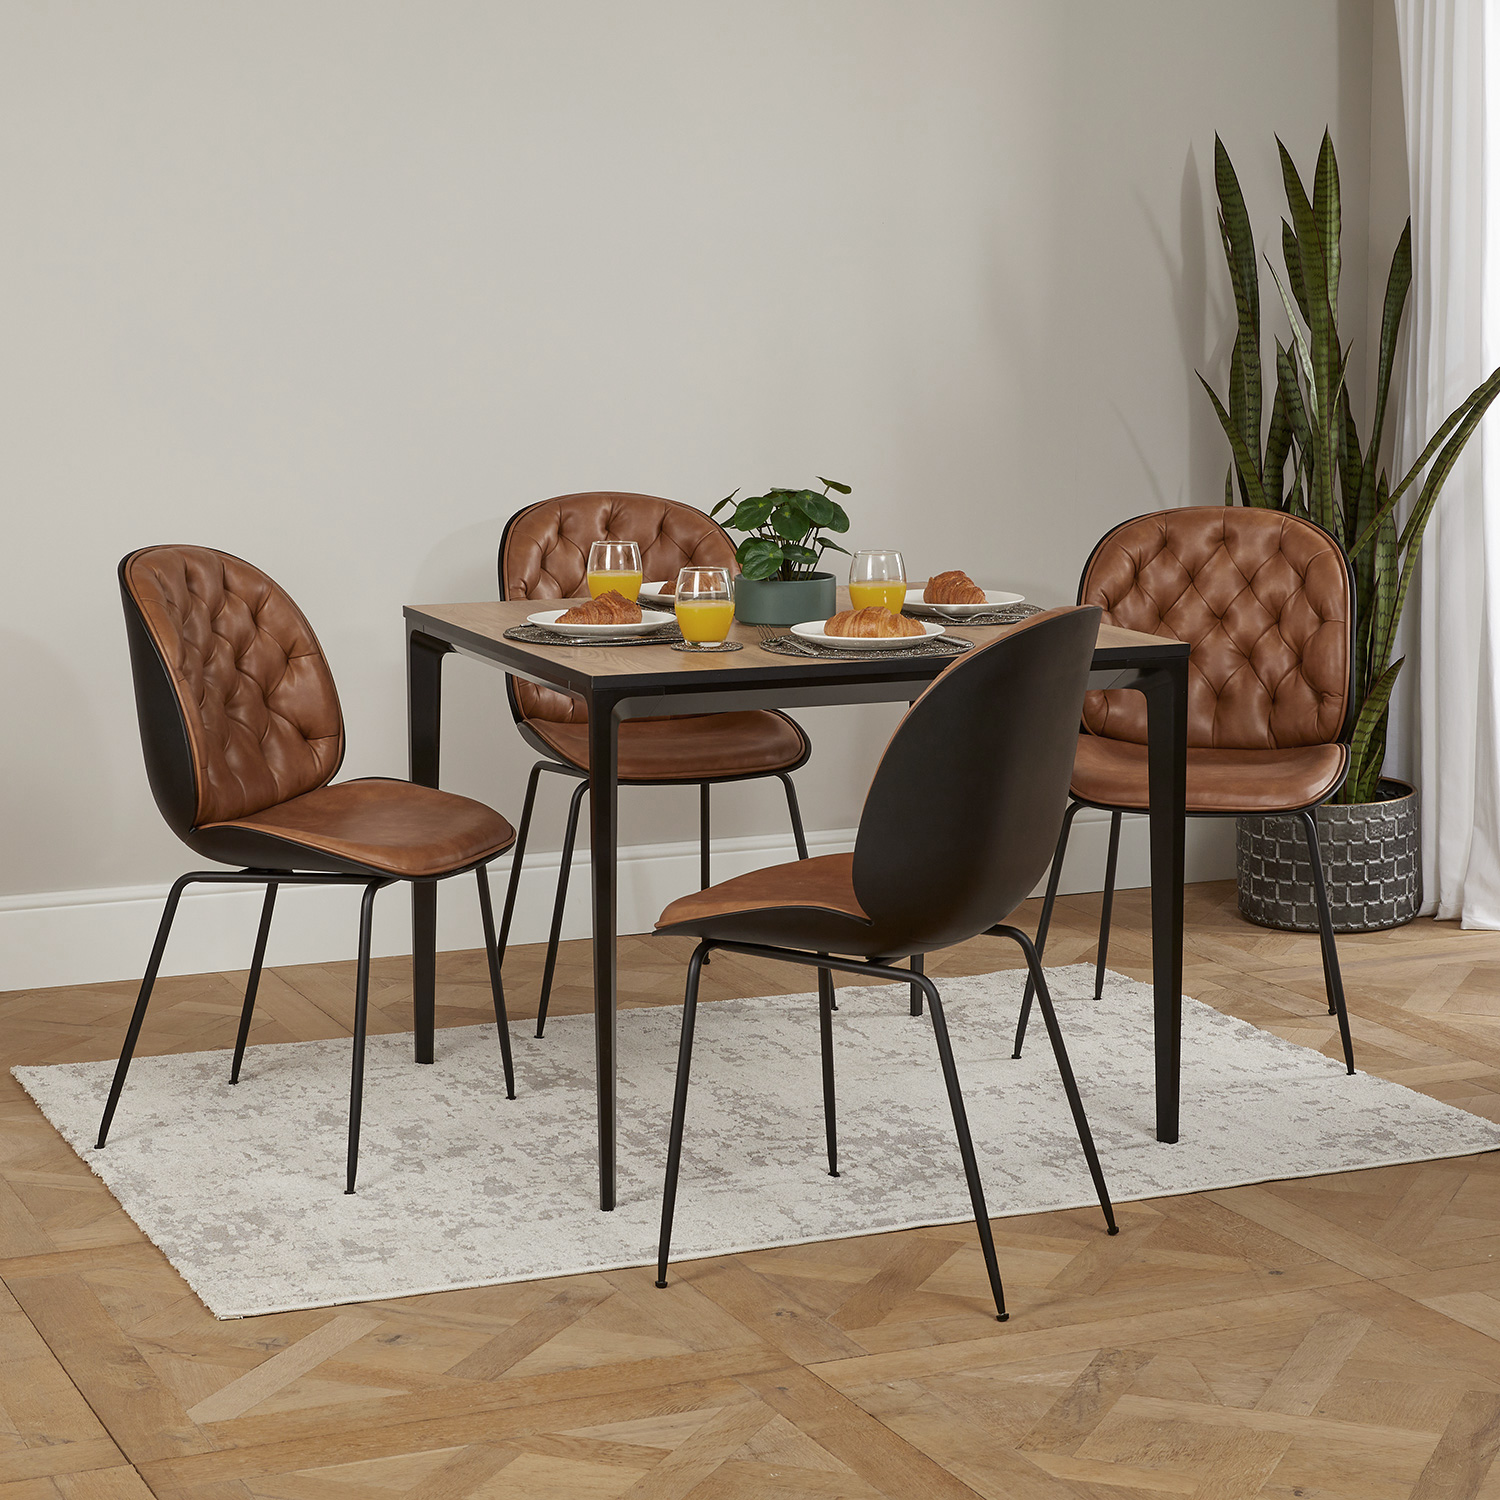 Bellagio 90cm Square Natural Oak Melamine Dining Table Set with 4x Thiago Tan Dining Chairs